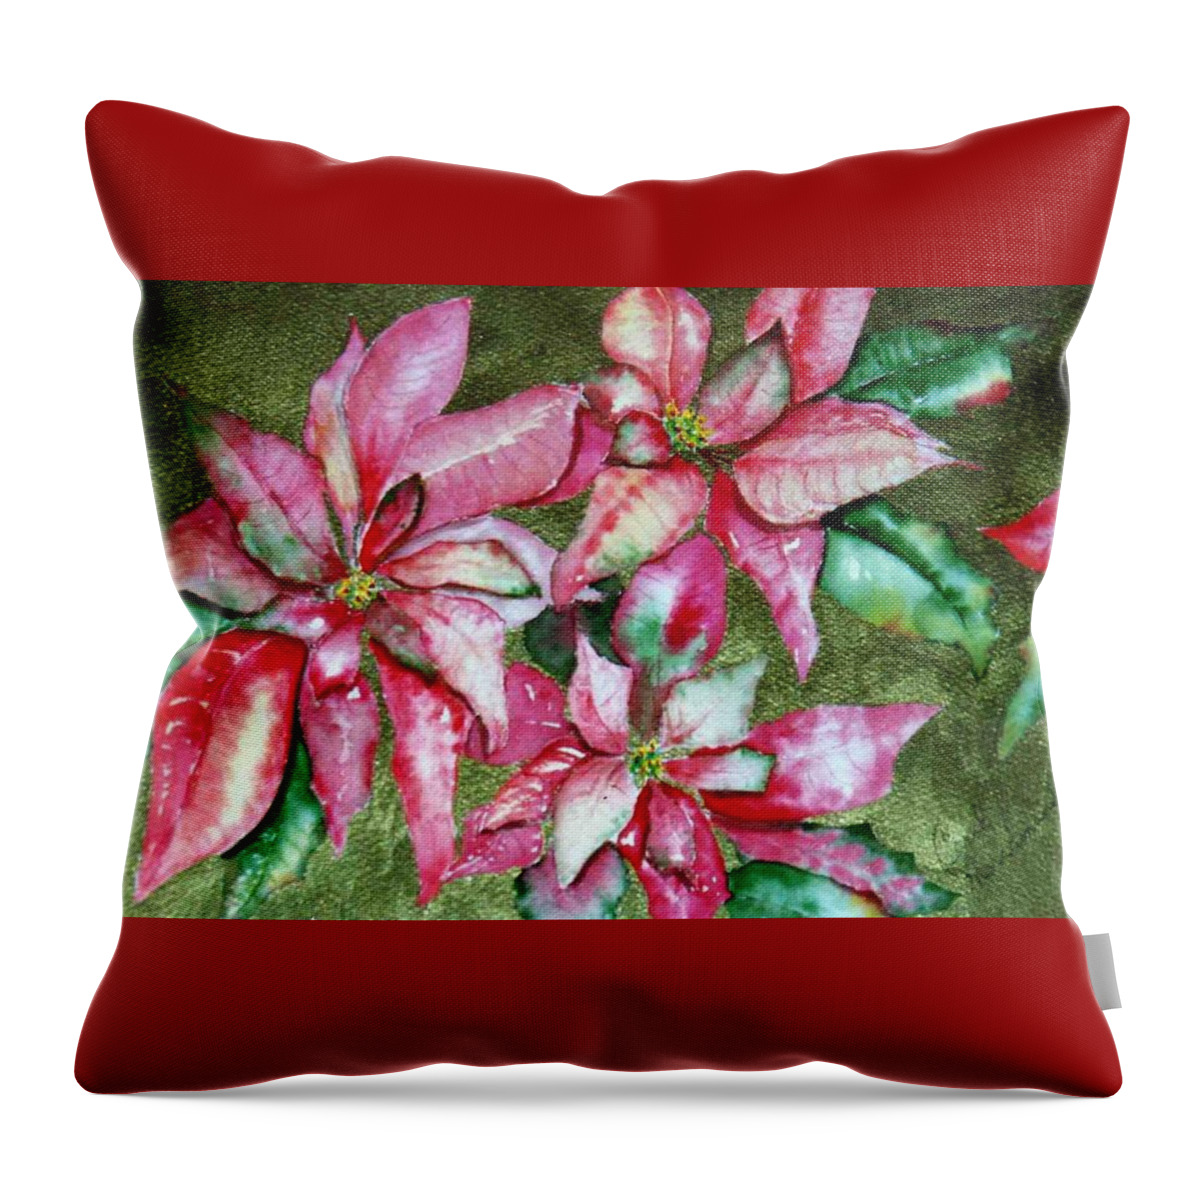 Christmas Throw Pillow featuring the painting Poinsettia by Carol Denna